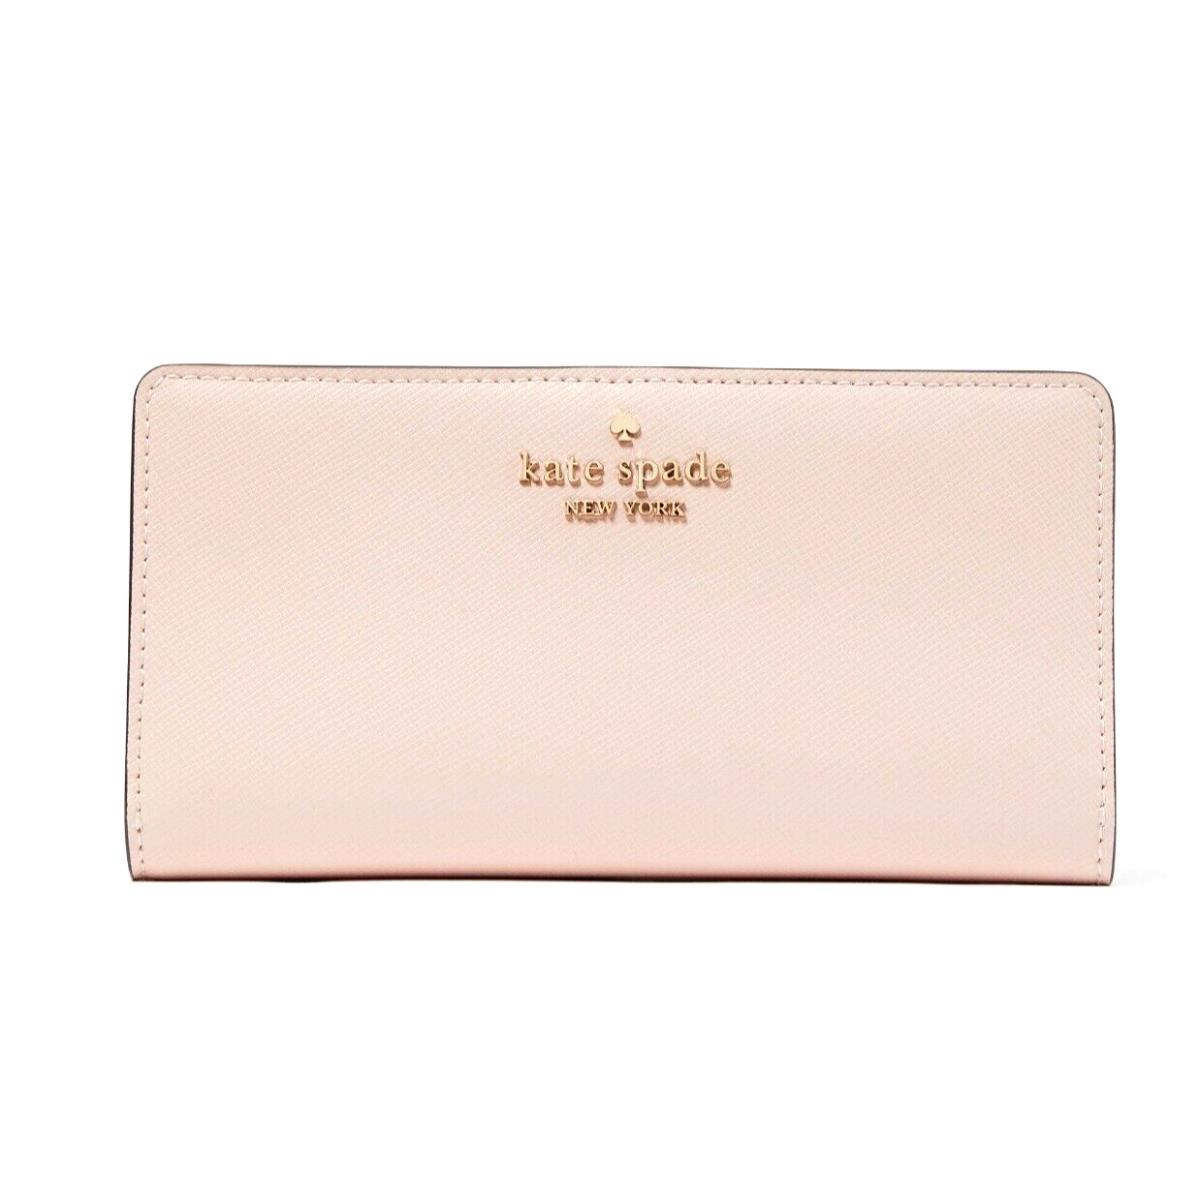 New Kate Spade Madison Large Slim Bifold Saffiano Leather Wallet Conch Pink